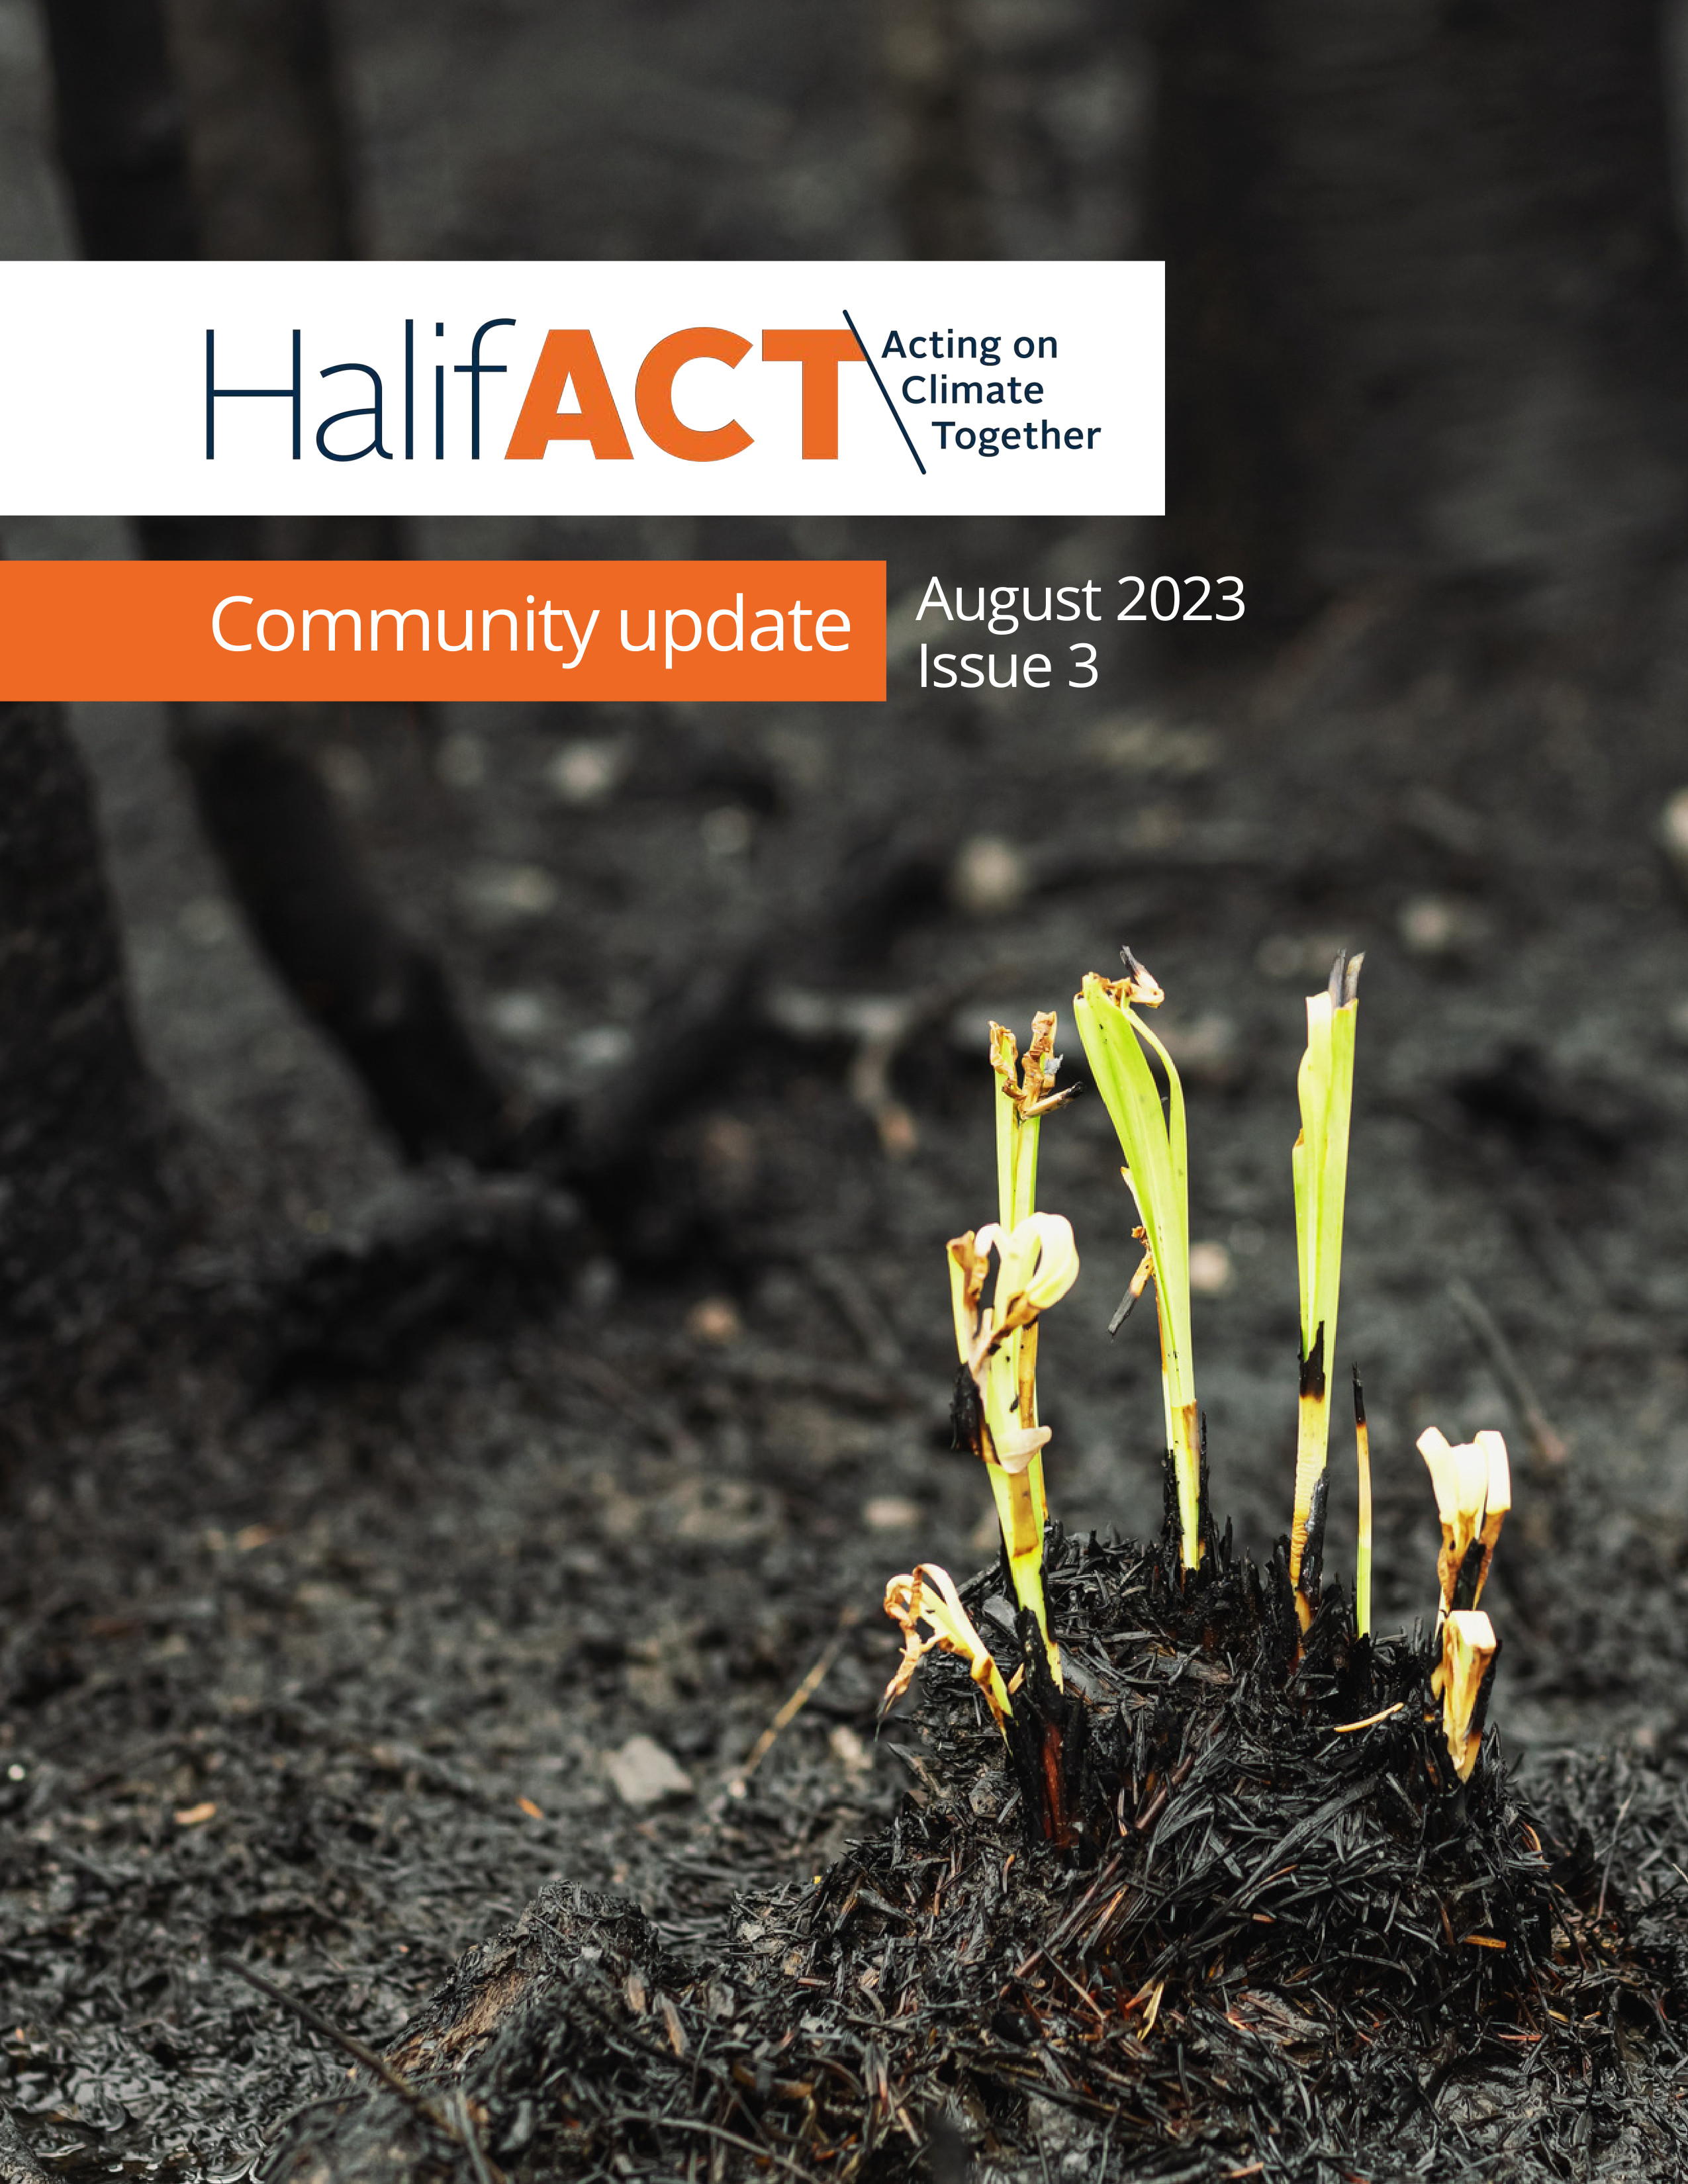 Image depicting the HalifACT logo, Issue 3 August 2023 and plants growing from scorched earth.